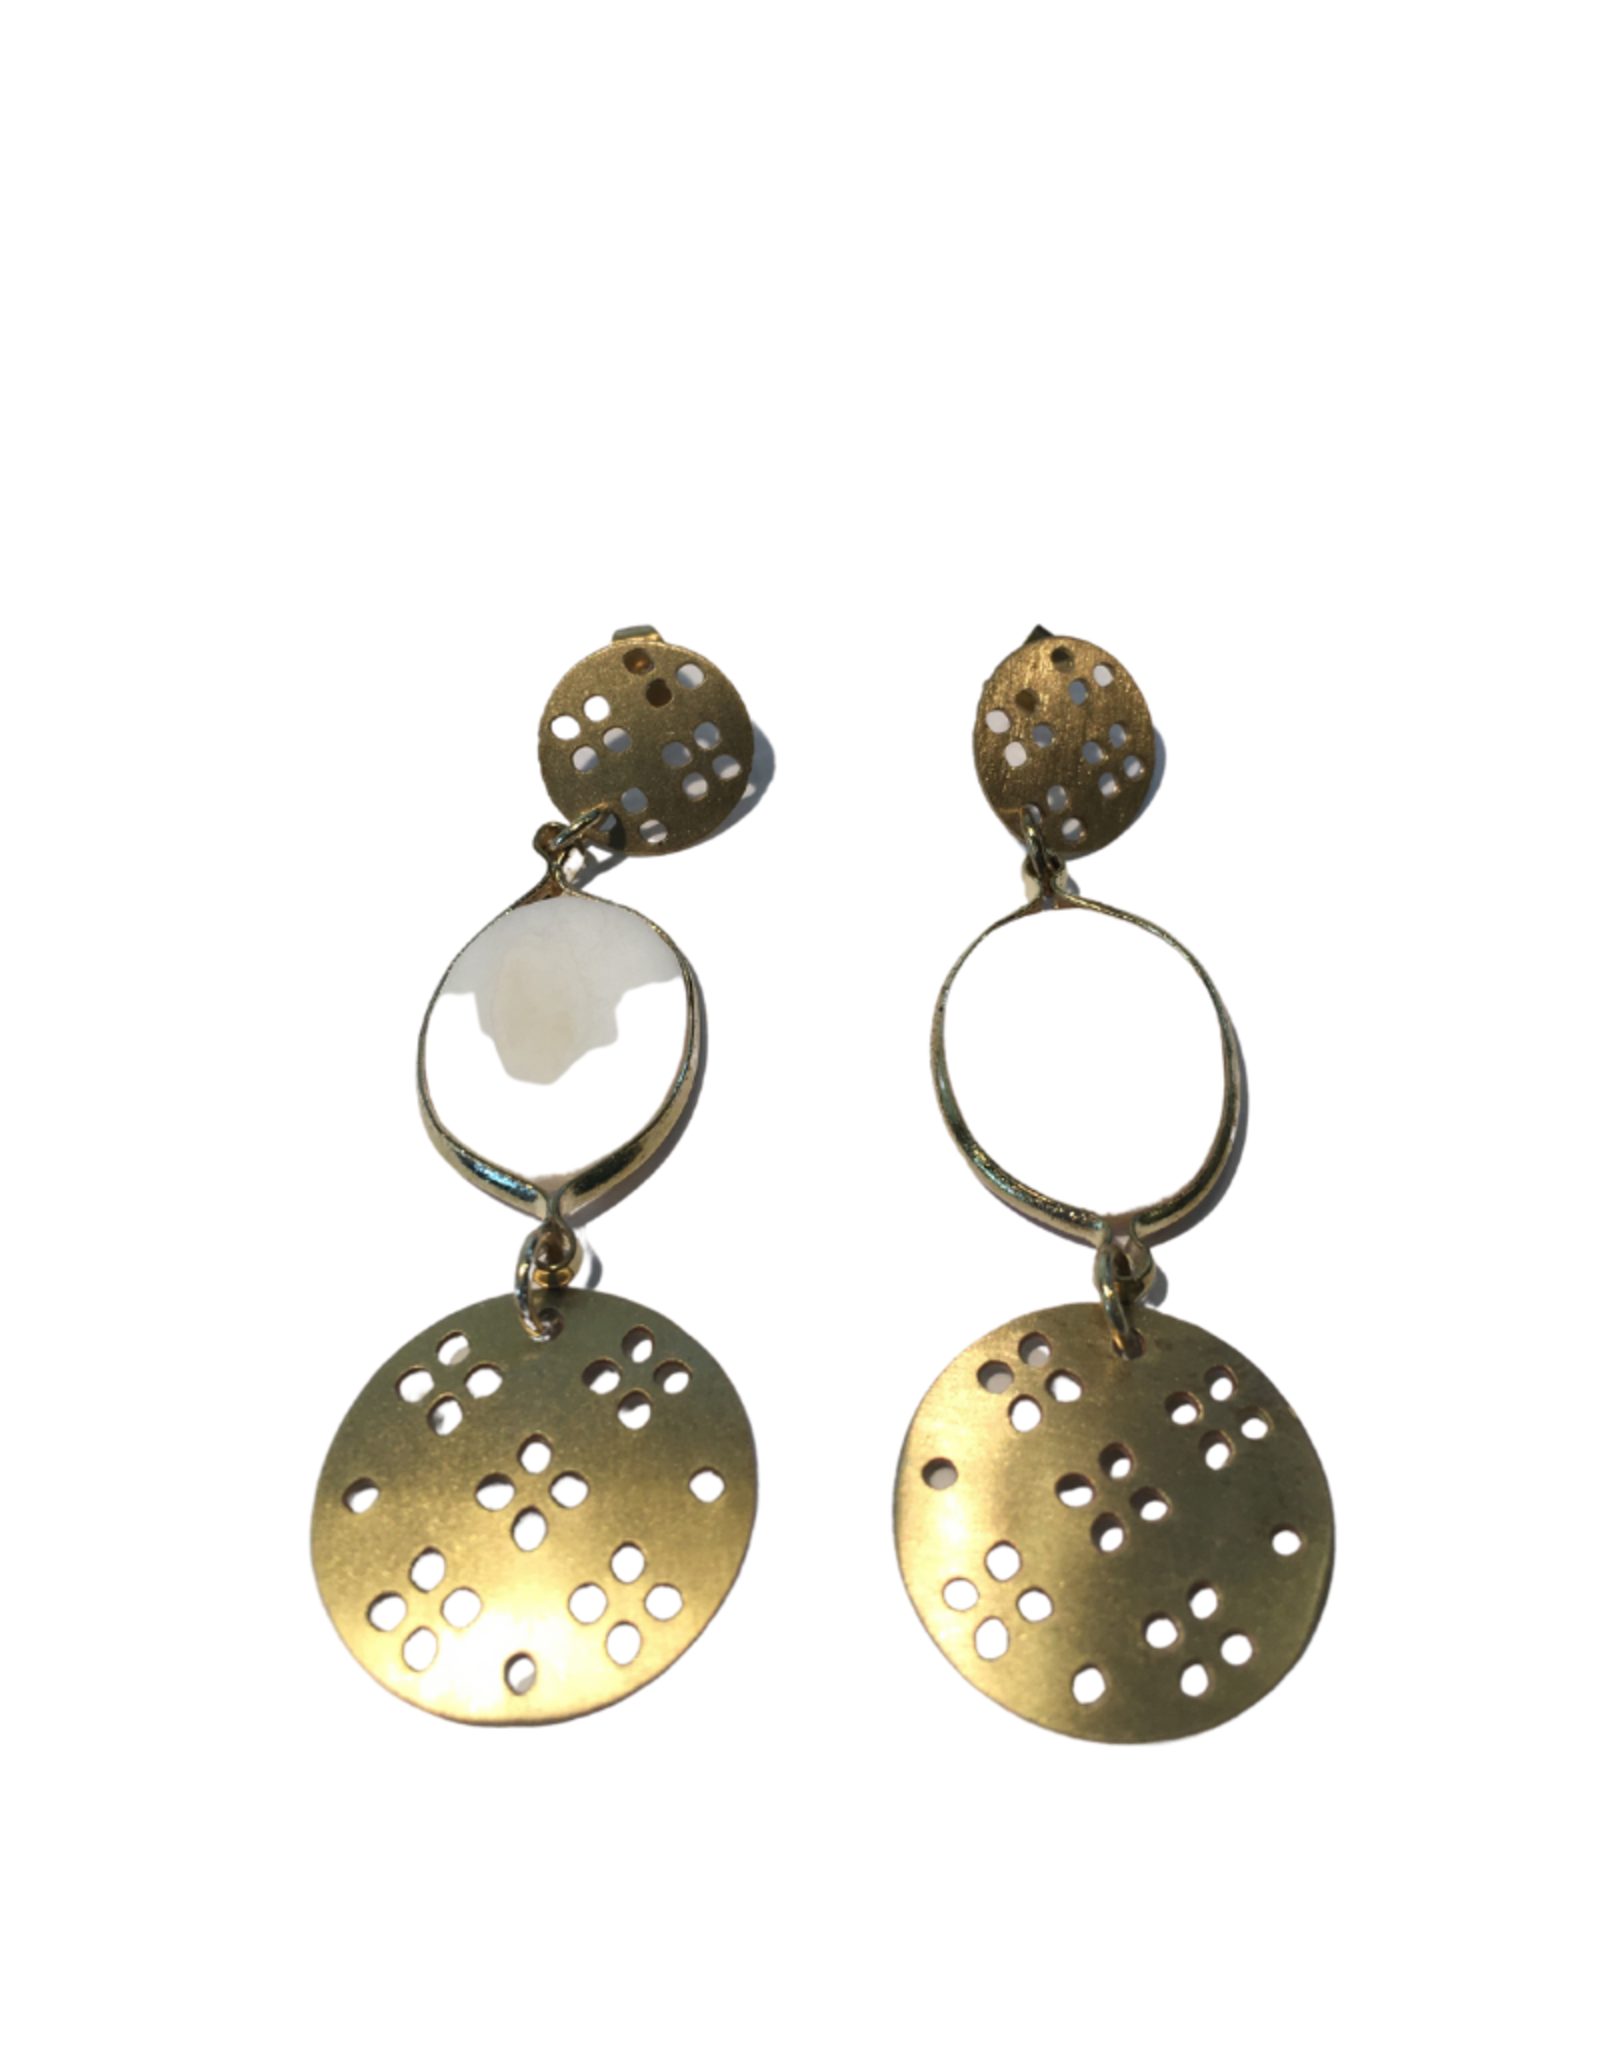 Global Crafts Mother of Pearl Gold Earrings